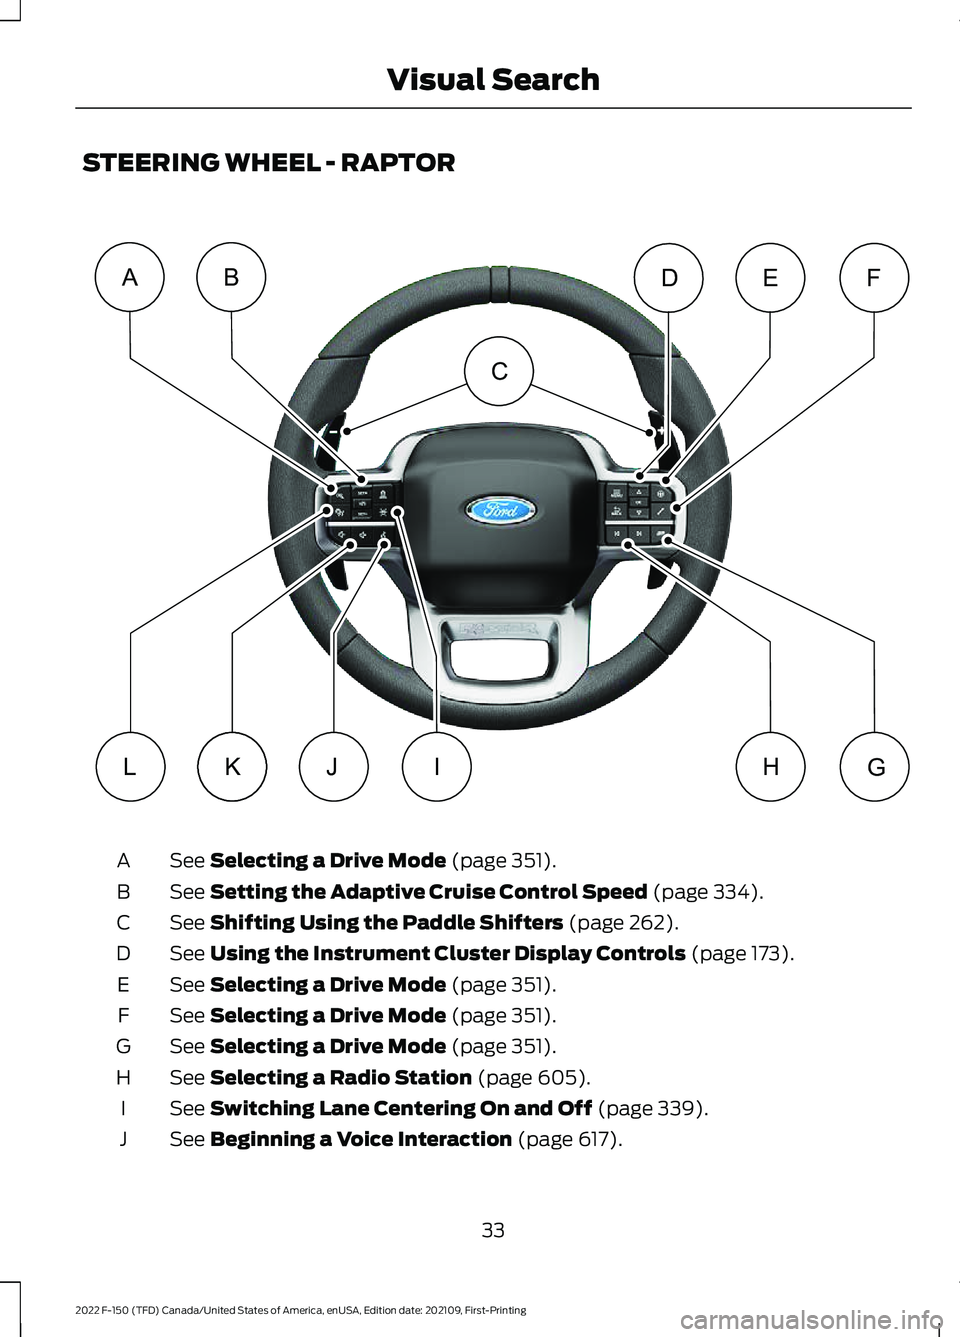 FORD F-150 2022 Owners Guide STEERING WHEEL - RAPTOR
See Selecting a Drive Mode (page 351).
A
See 
Setting the Adaptive Cruise Control Speed (page 334).
B
See 
Shifting Using the Paddle Shifters (page 262).
C
See 
Using the Instr